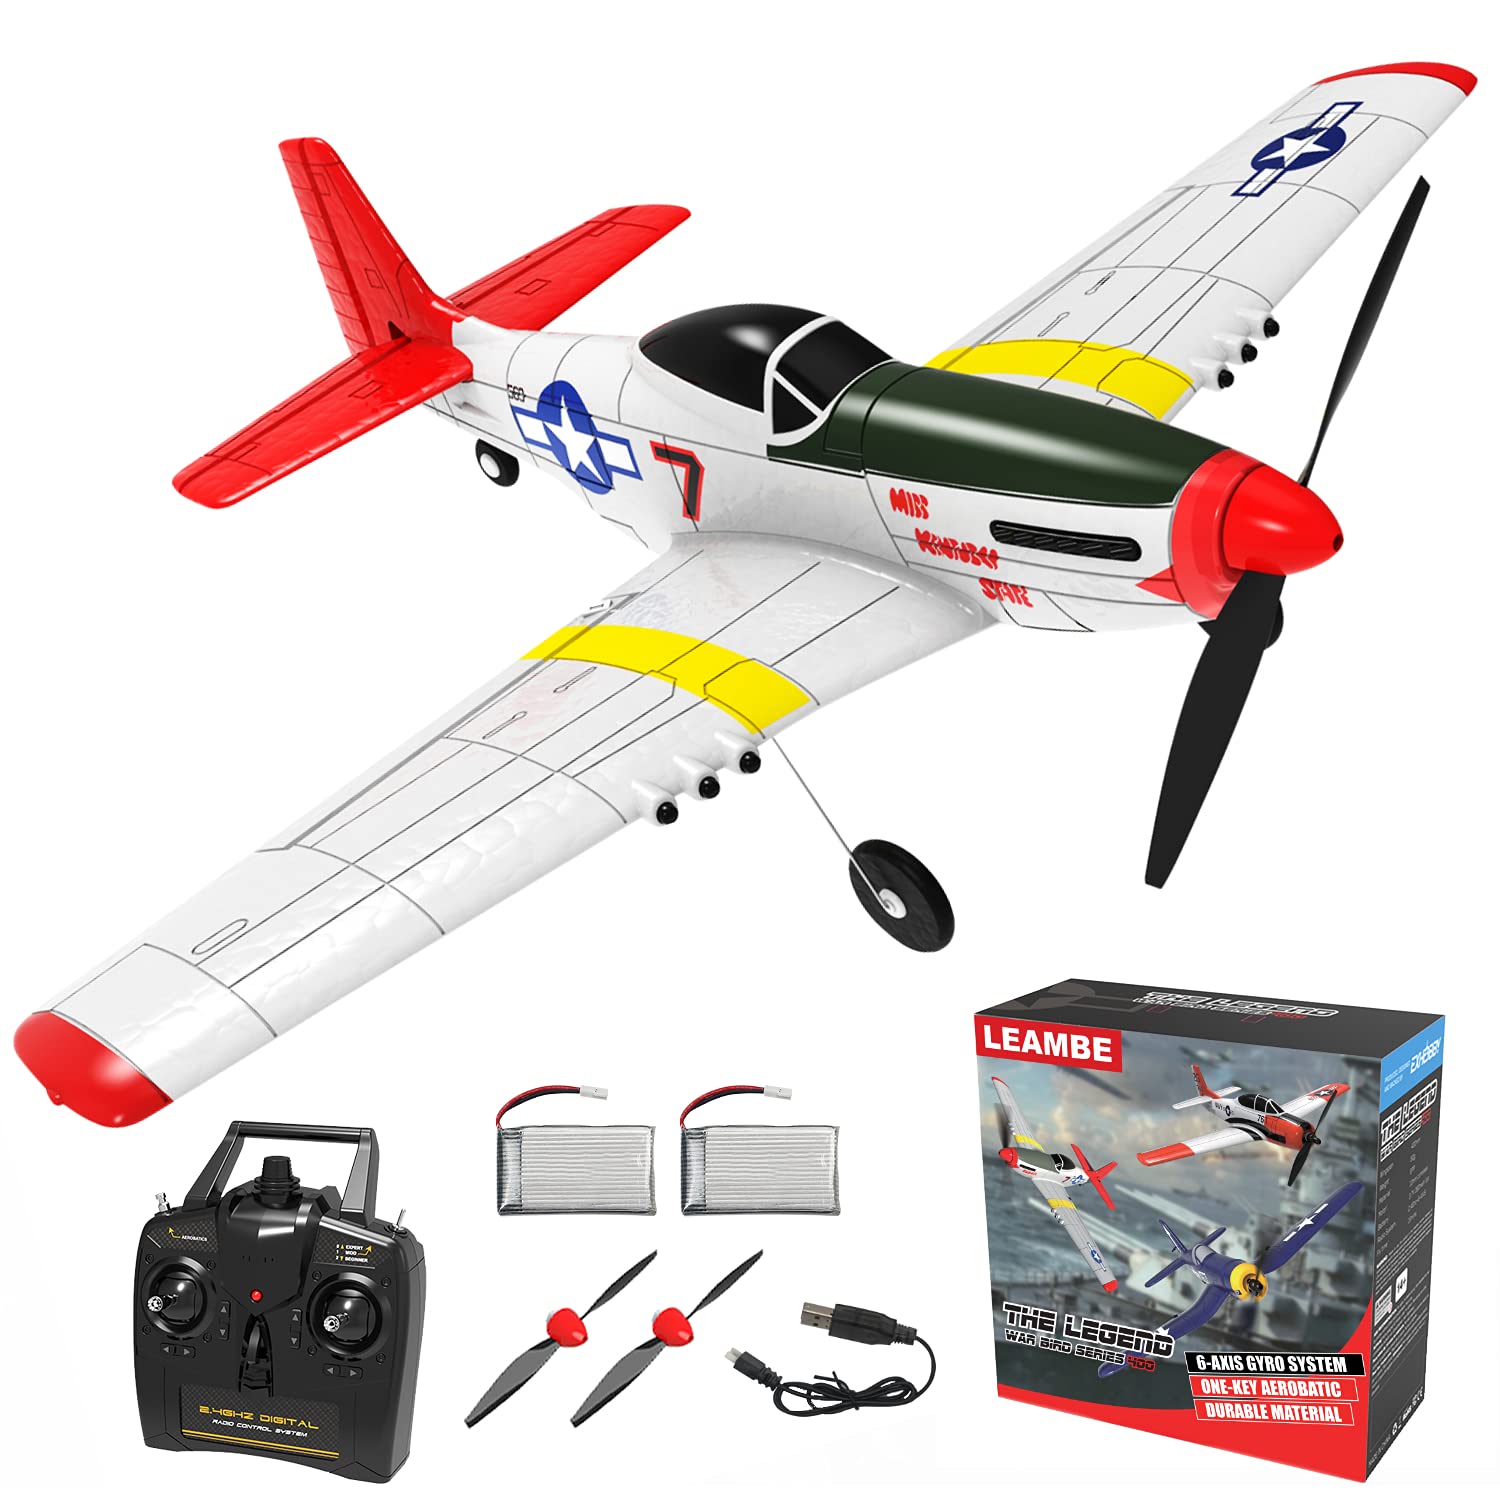 LEAMBE Remote control Aircraft Plane Rc Plane with 3 Modes That Easy to control One-Key U-Turn Easy control for Adults &Kids LEAMBE